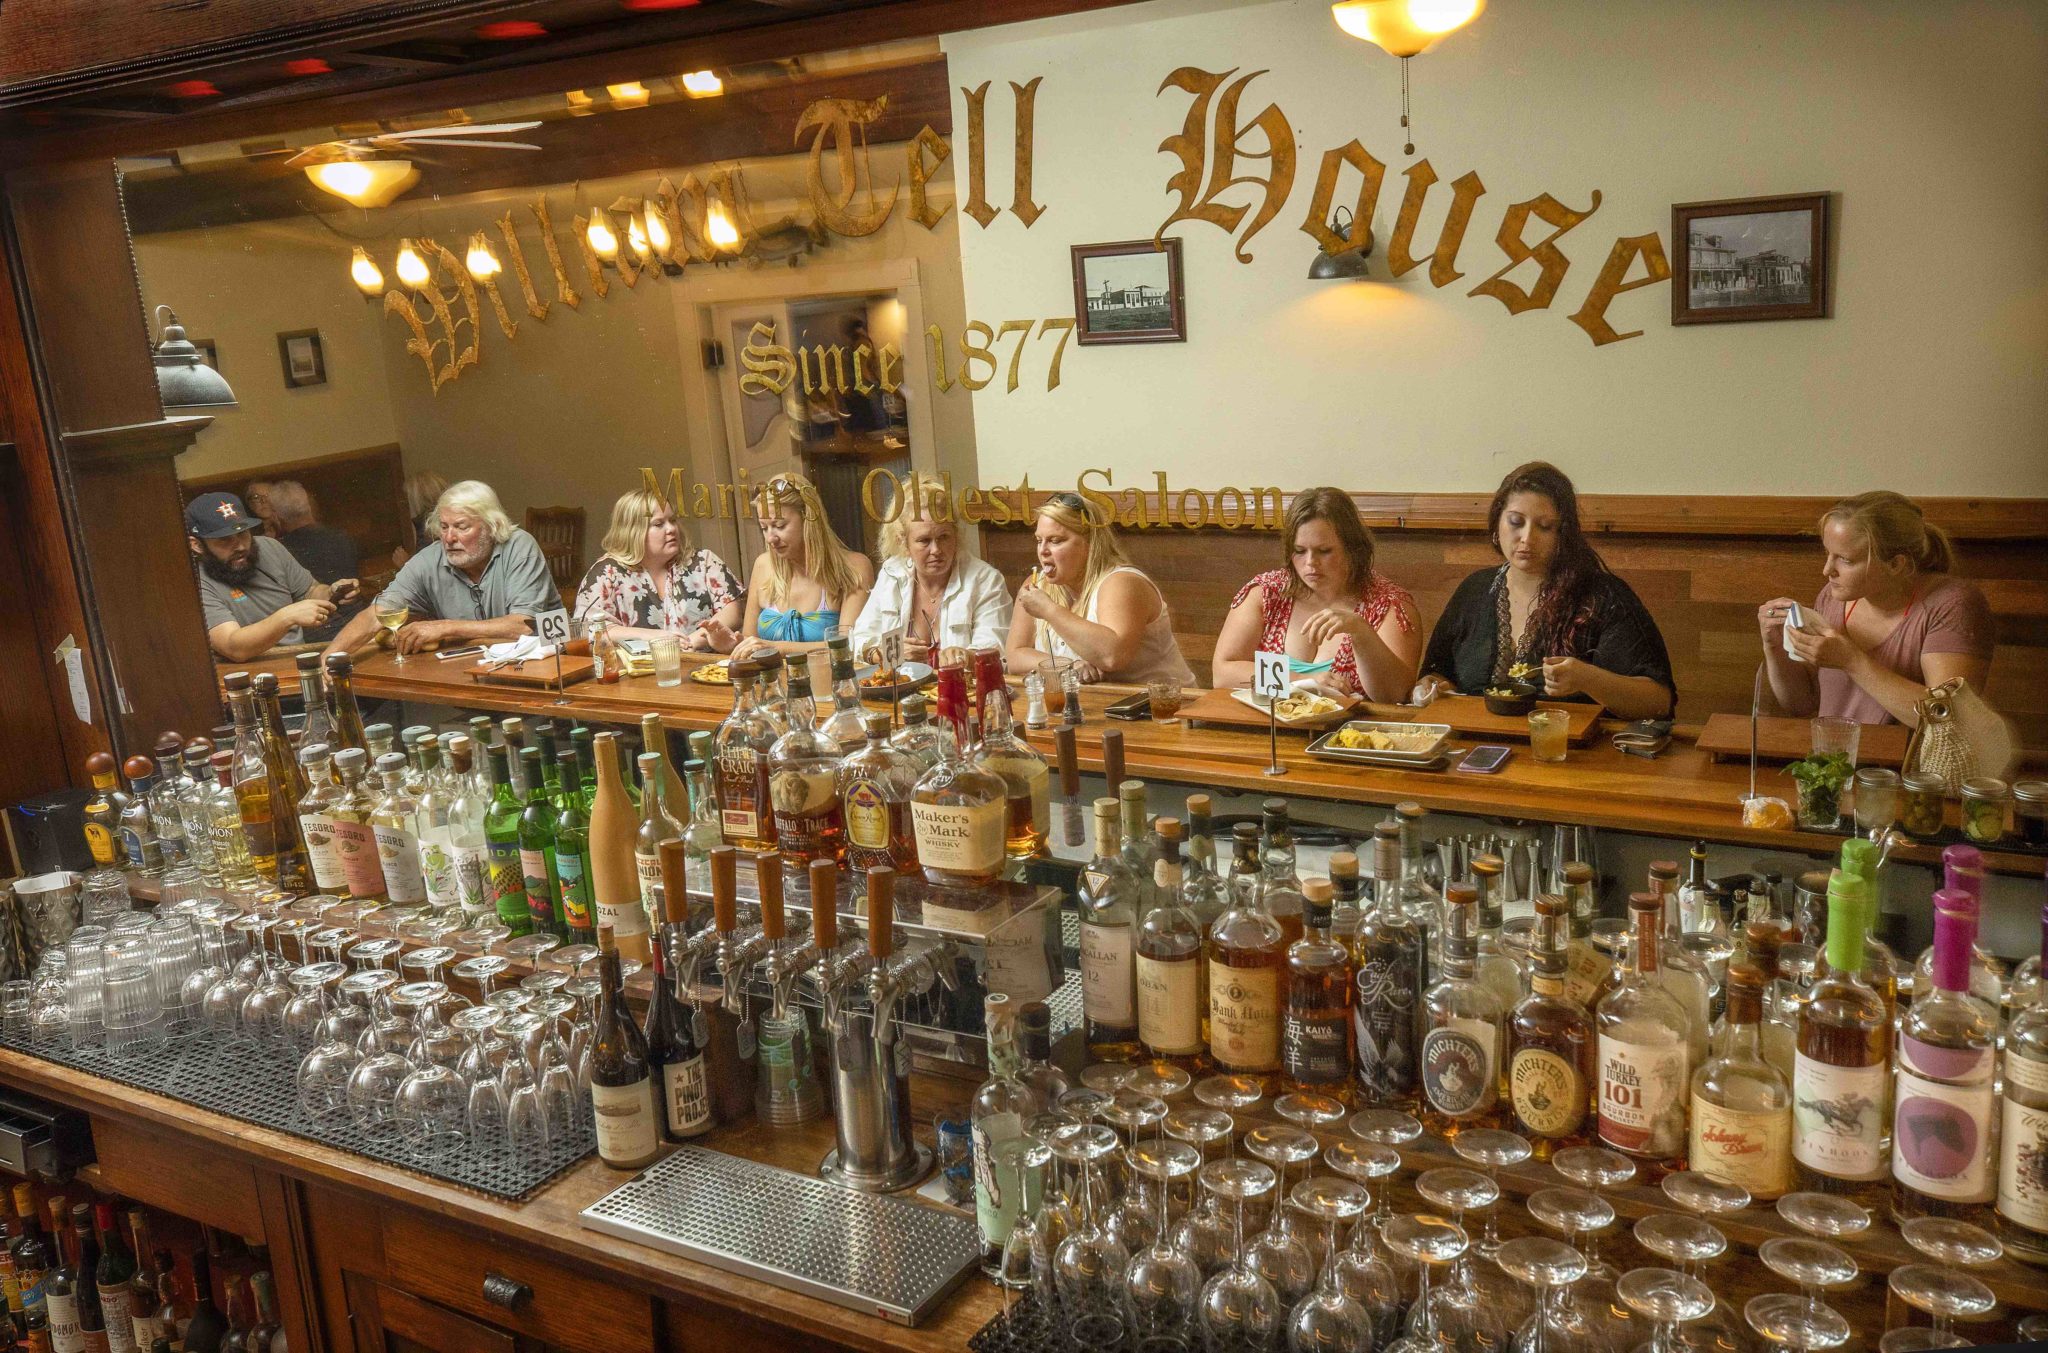 Local friends enjoy a a drink and appetizers at the bar at the William Tell House in Tomales. (John Burgess/The Press Democrat)